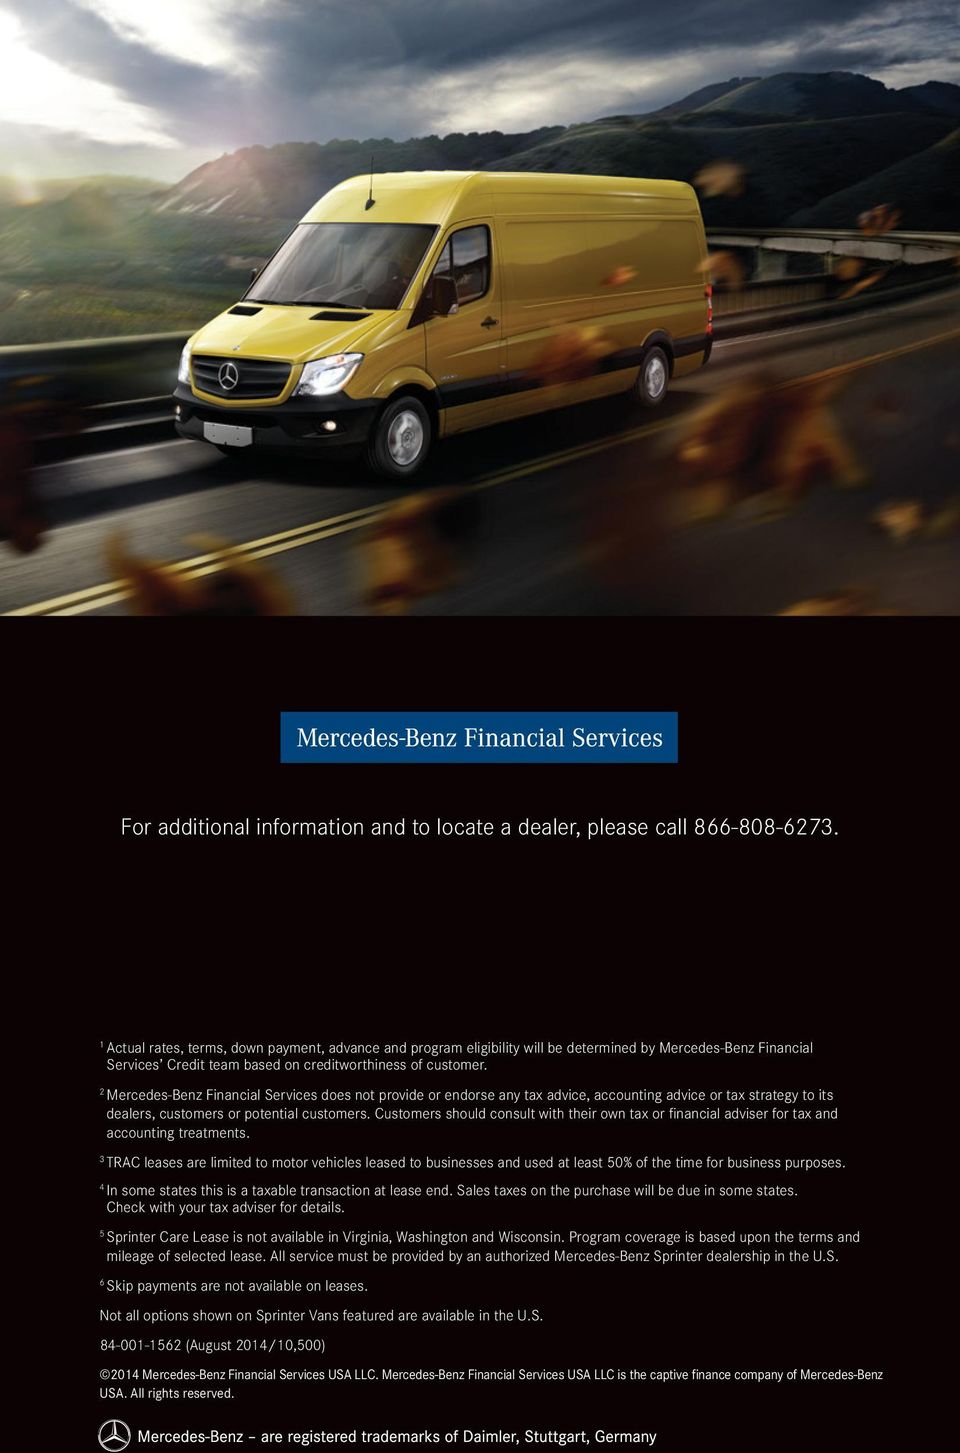 2 Mercedes-Benz Financial Services does not provide or endorse any tax advice, accounting advice or tax strategy to its dealers, customers or potential customers.